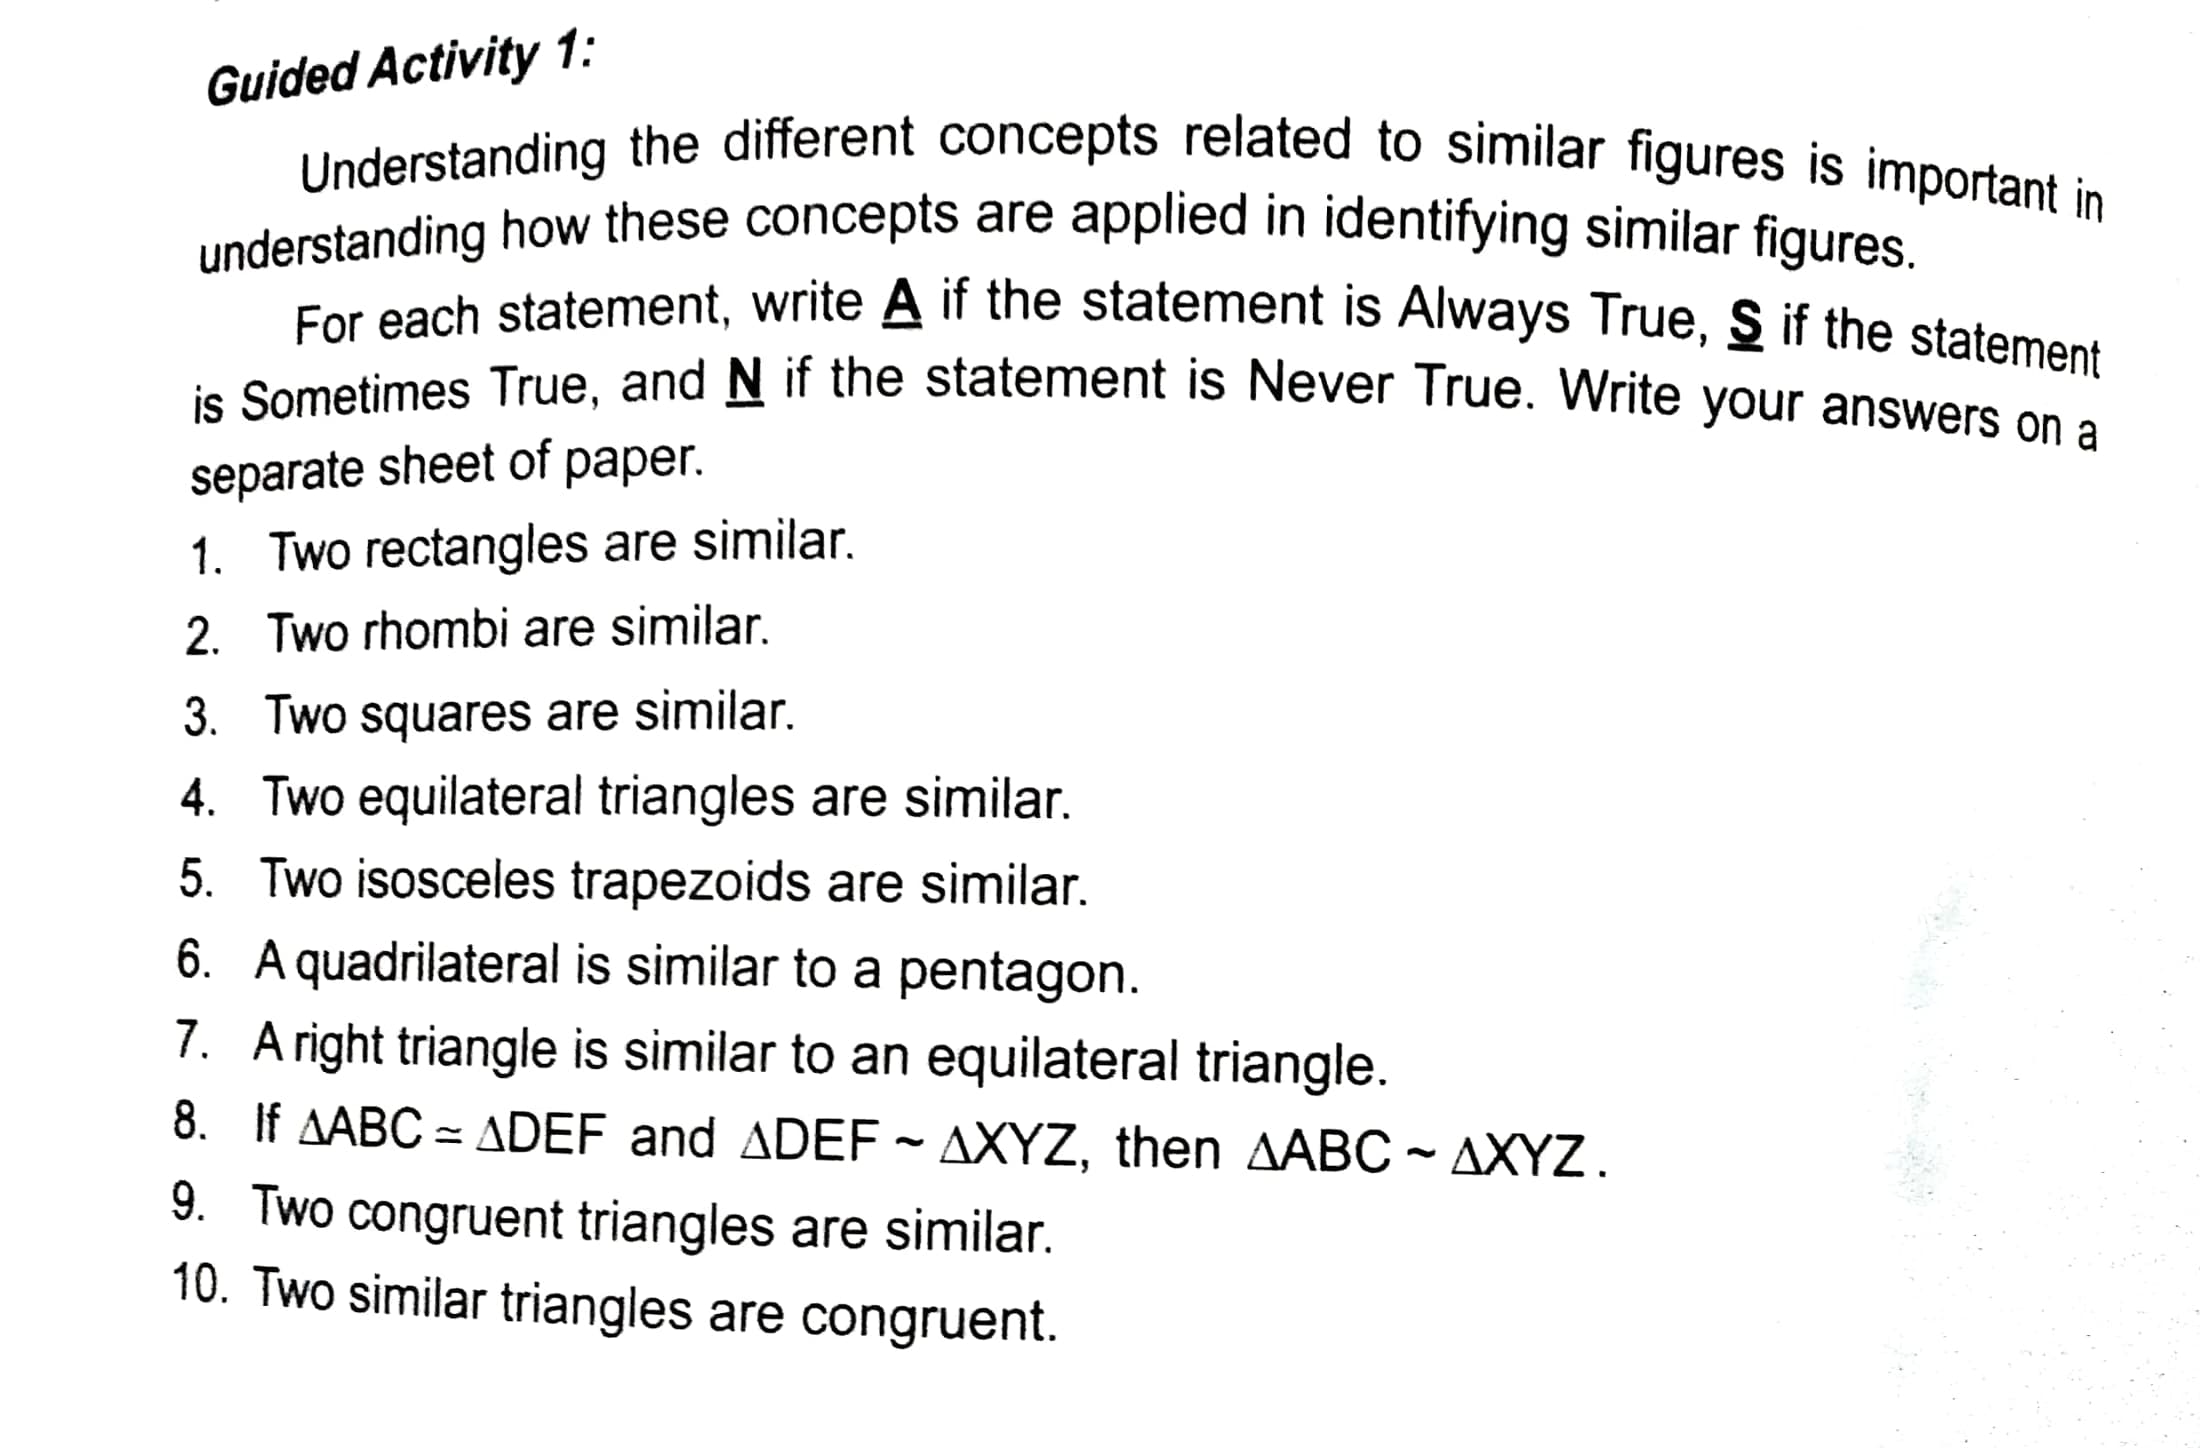 Guided Activity 1:
understanding how these concepts are applied in identifying similar figures
ie Sometimes True, and N if the statement is Never True. Write your answers On
separate sheet of paper.
1. Two rectangles are similar.
2. Two rhombi are similar.
3. Two squares are similar.
4. Two equilateral triangles are similar.
5. Two isosceles trapezoids are similar.
6. A quadrilateral is similar to a pentagon.
7. Aright triangle is similar to an equilateral triangle.
8. If AABC = ADEF and ADEF ~ AXYZ, then AABC - AXYZ.
9. Two congruent triangles are similar.
10. Two similar triangles are congruent.
